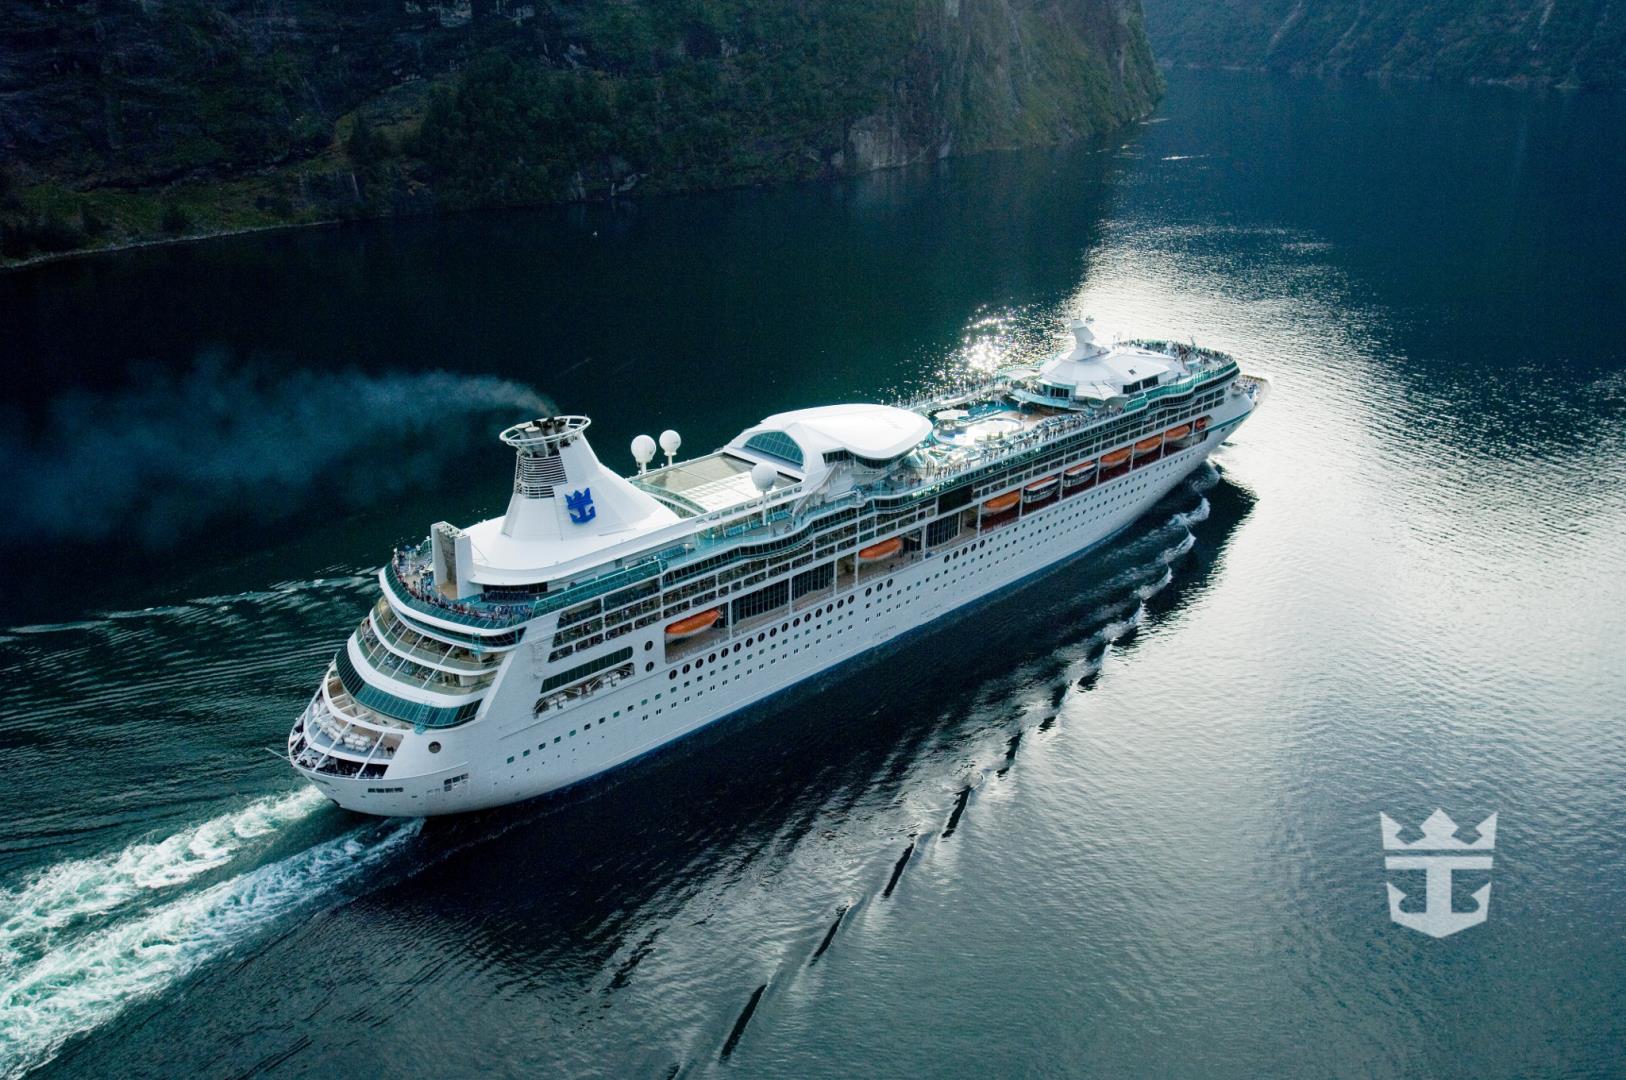 Vision of the Seas makes her way down the fjords in Norway